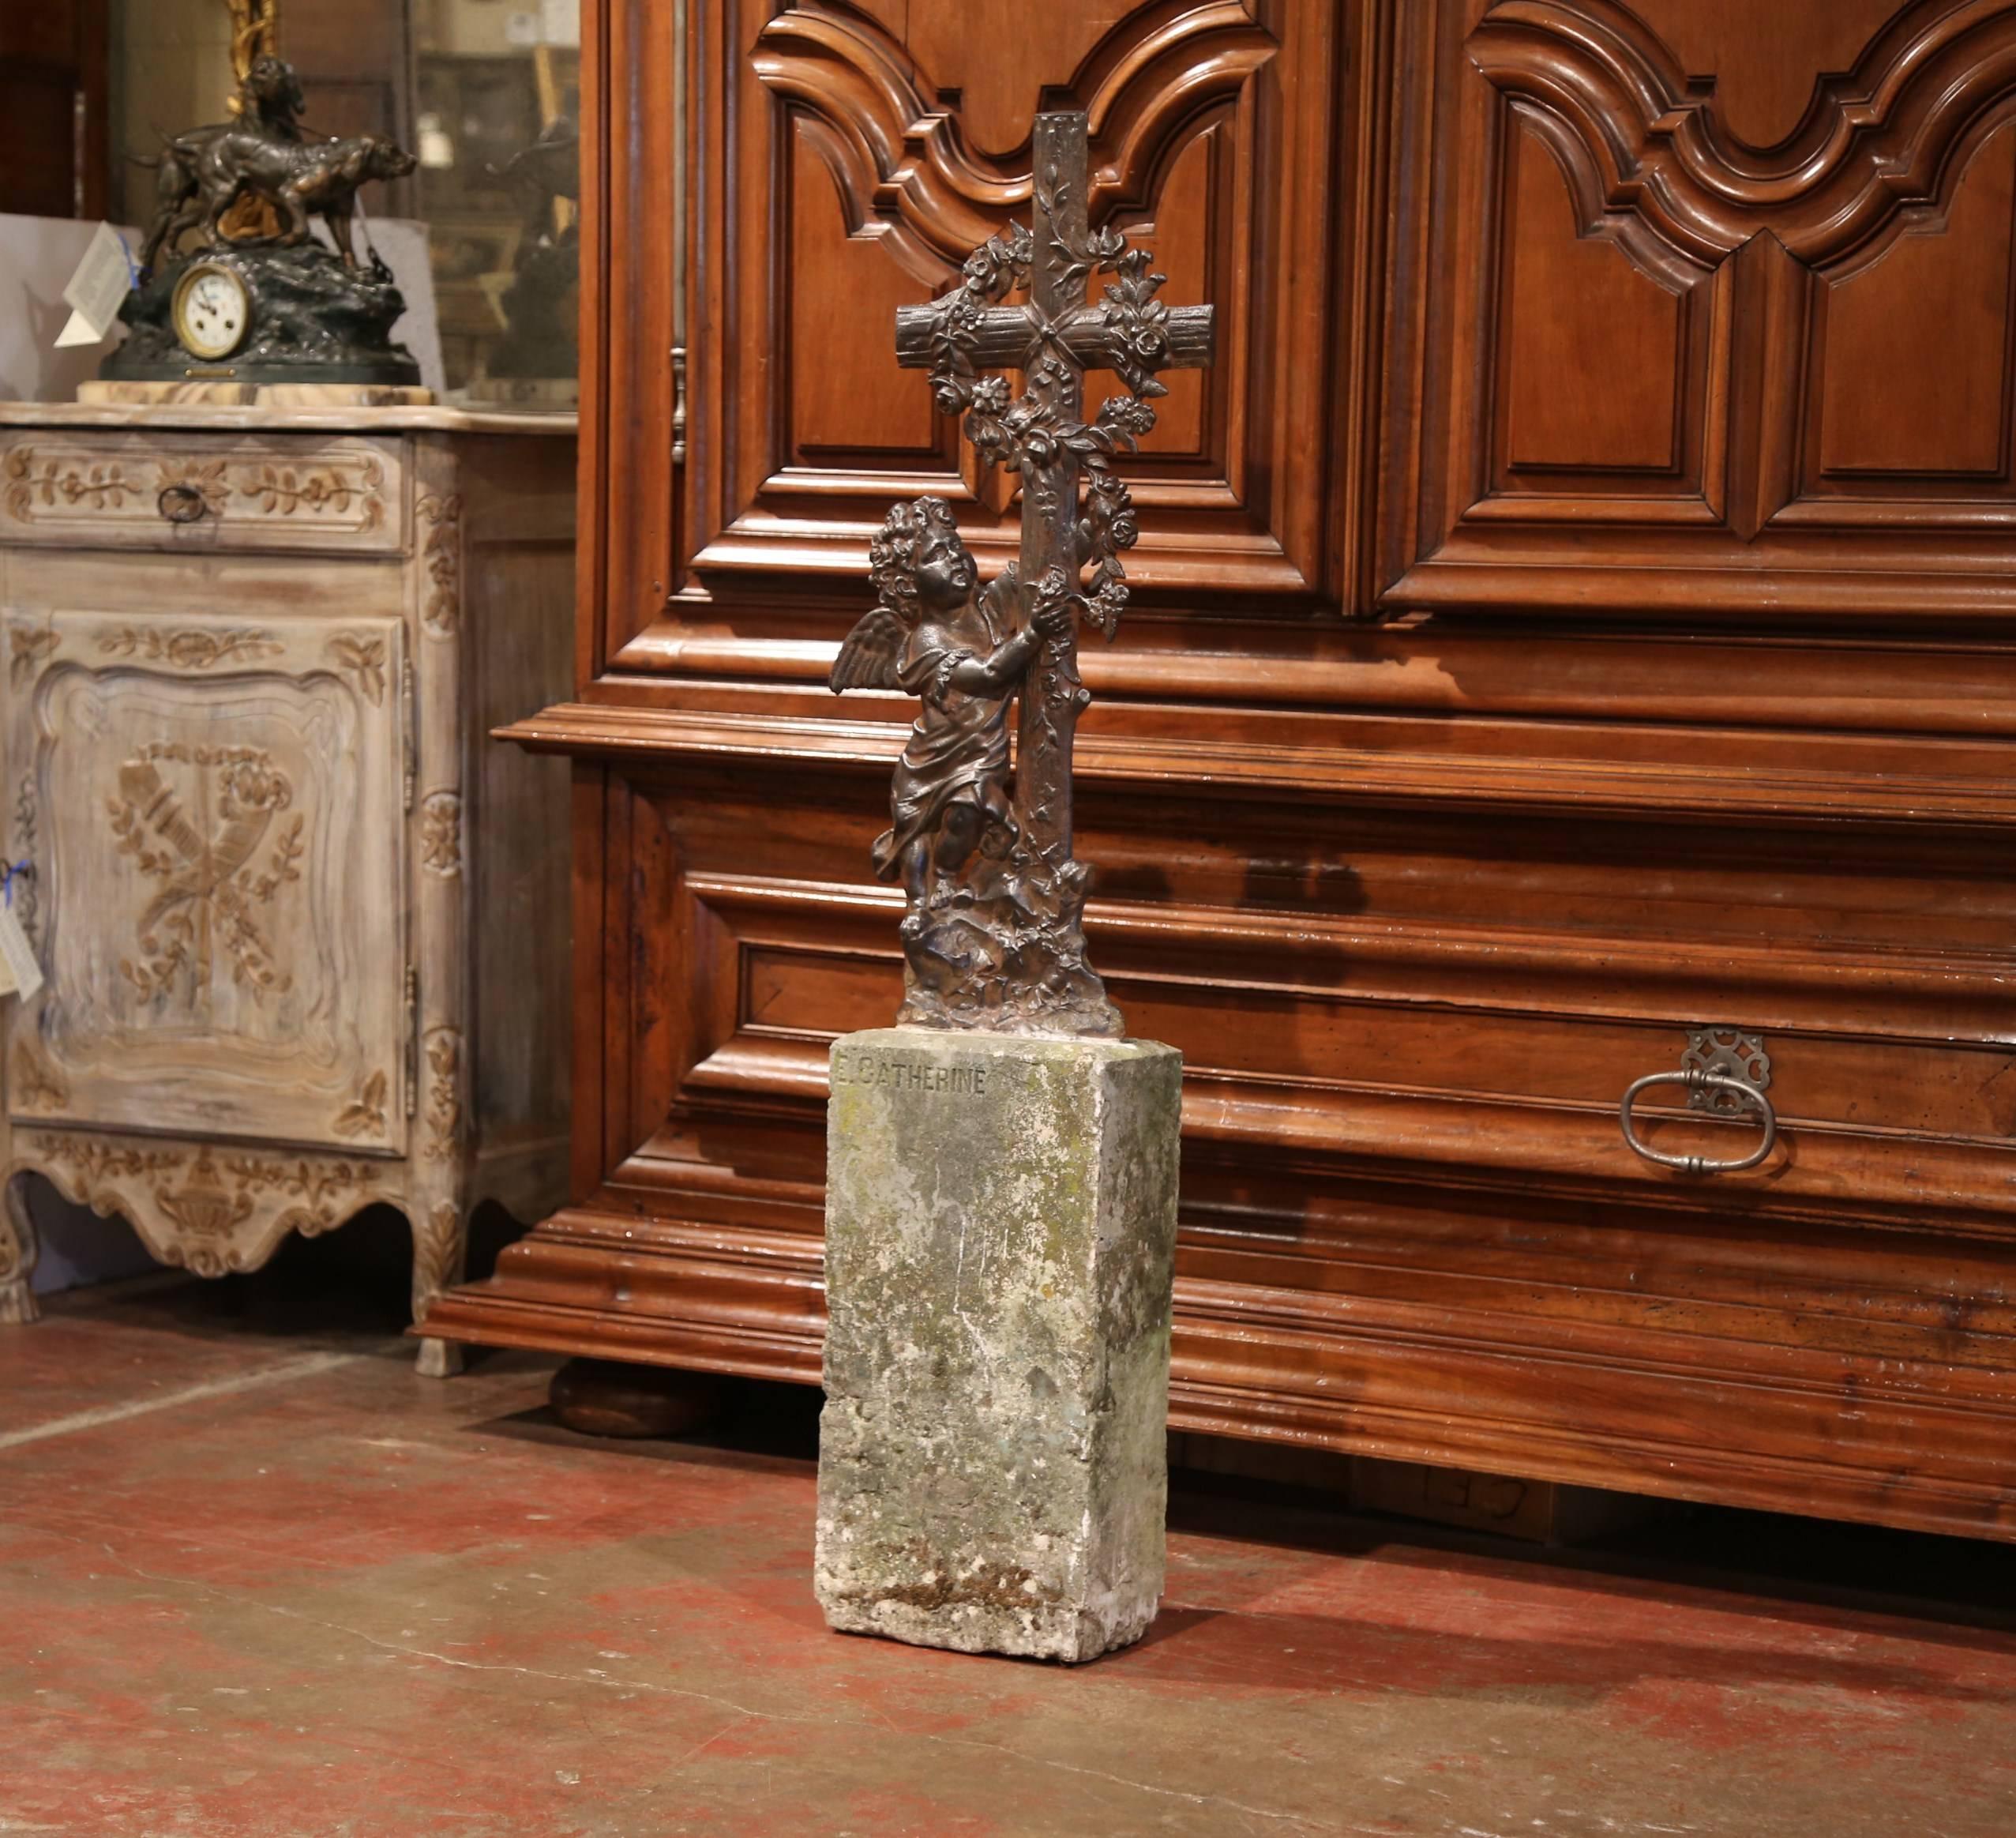 This elegant, antique cross was crafted in Southern France, circa 1850. The unique, sturdy garden piece features a cross with a cherub standing beside it. The cross is wrapped up with a lush crown of flowers and foliage. The base is made of a block